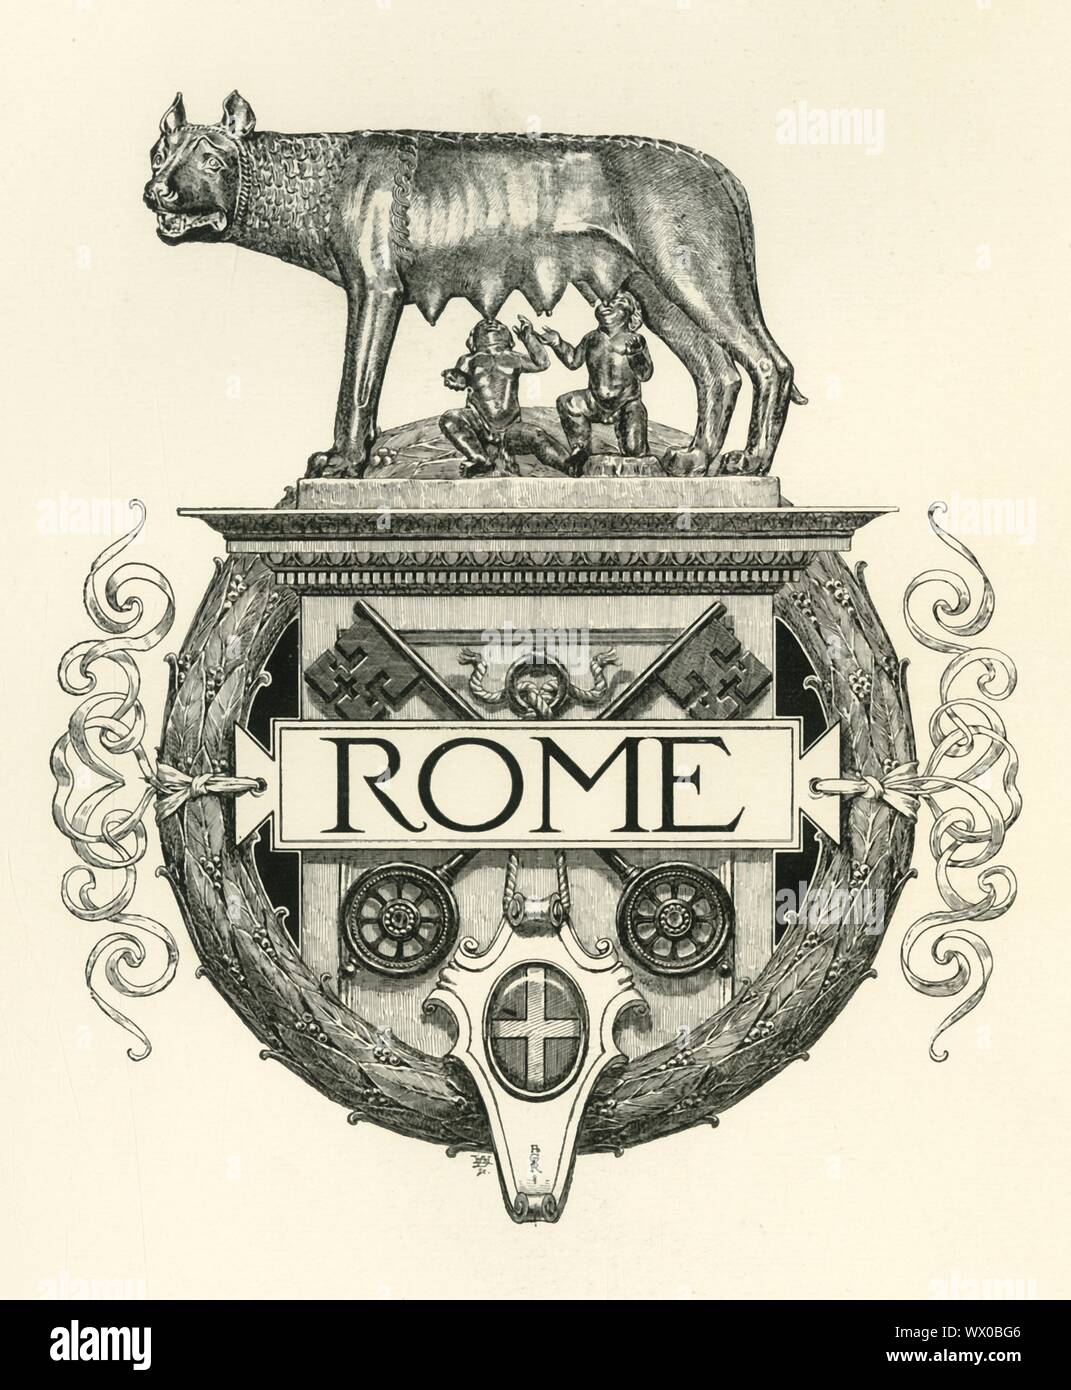 Rome', late 19th-early 20th century. Decorative coat of arms for the city  of Rome, capital of Italy . The two crossed keys represent the promise of  Christ to St Peter: 'I will